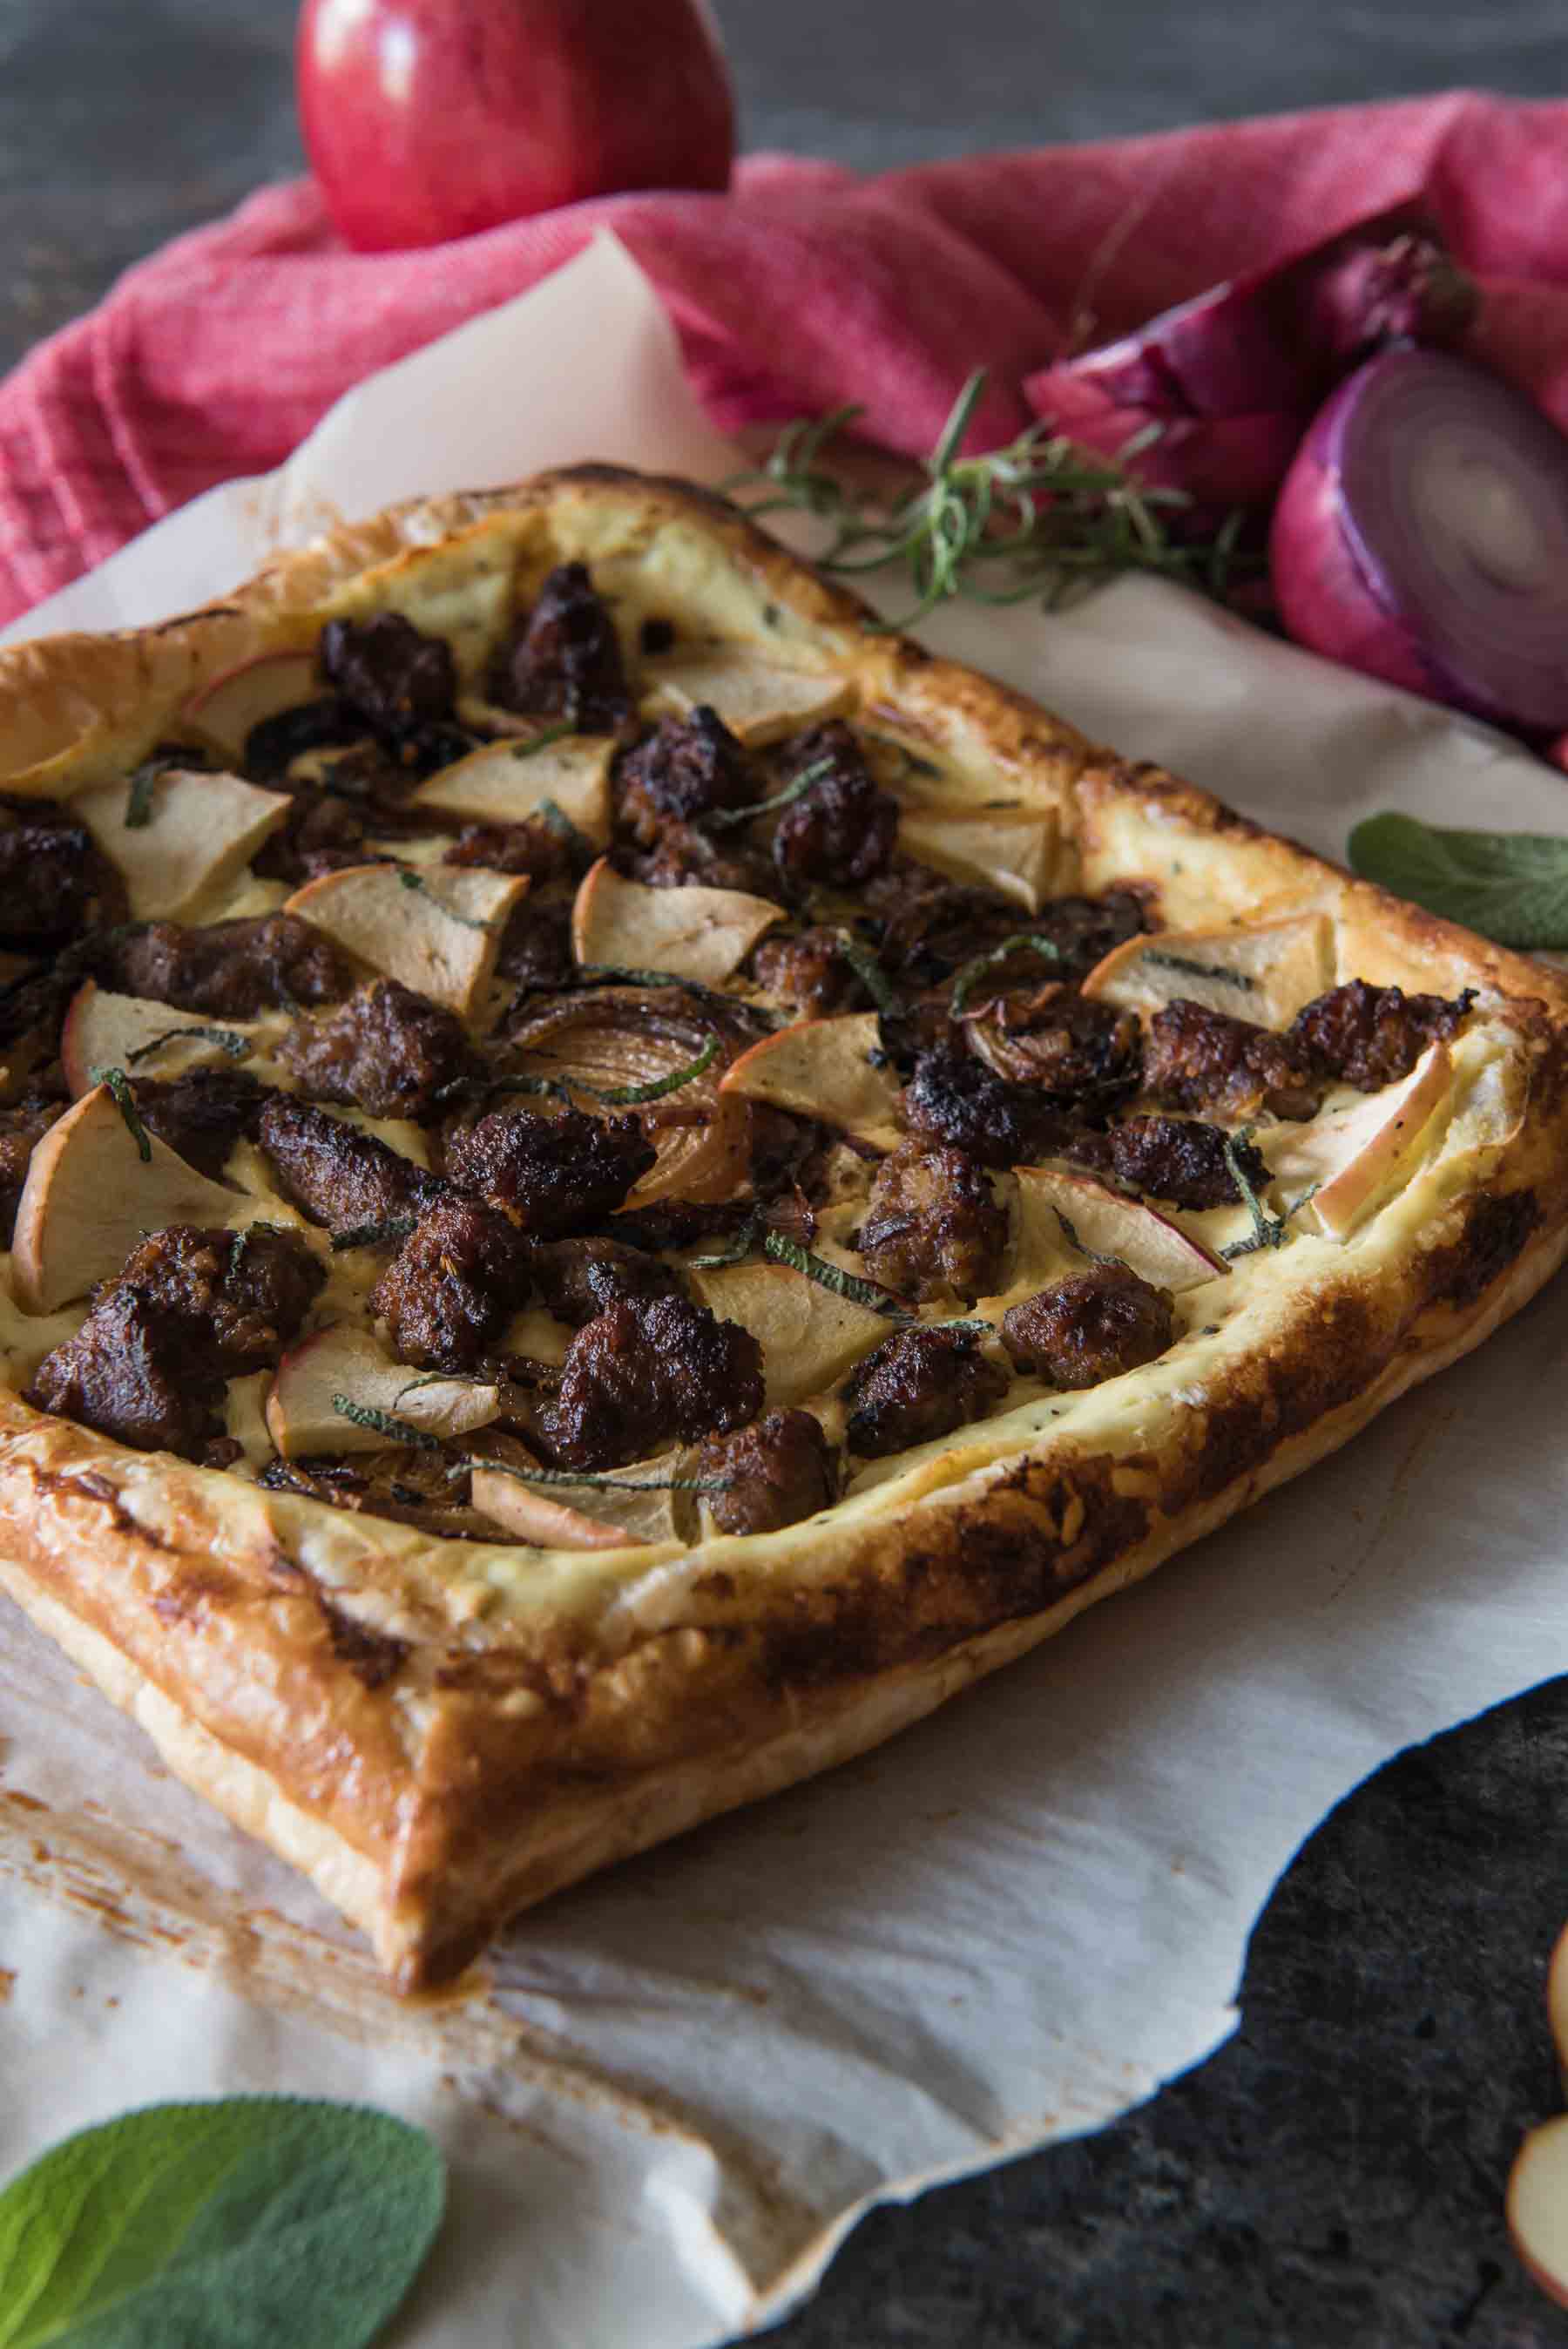 Caramelized onions, spicy Italian sausage, and sweet apple on an herbed ricotta, spread over puff pastry - whether served as an appetizer or snack, this Savory Apple Sausage Tart is sure to please any fall flavor-loving crowd! 